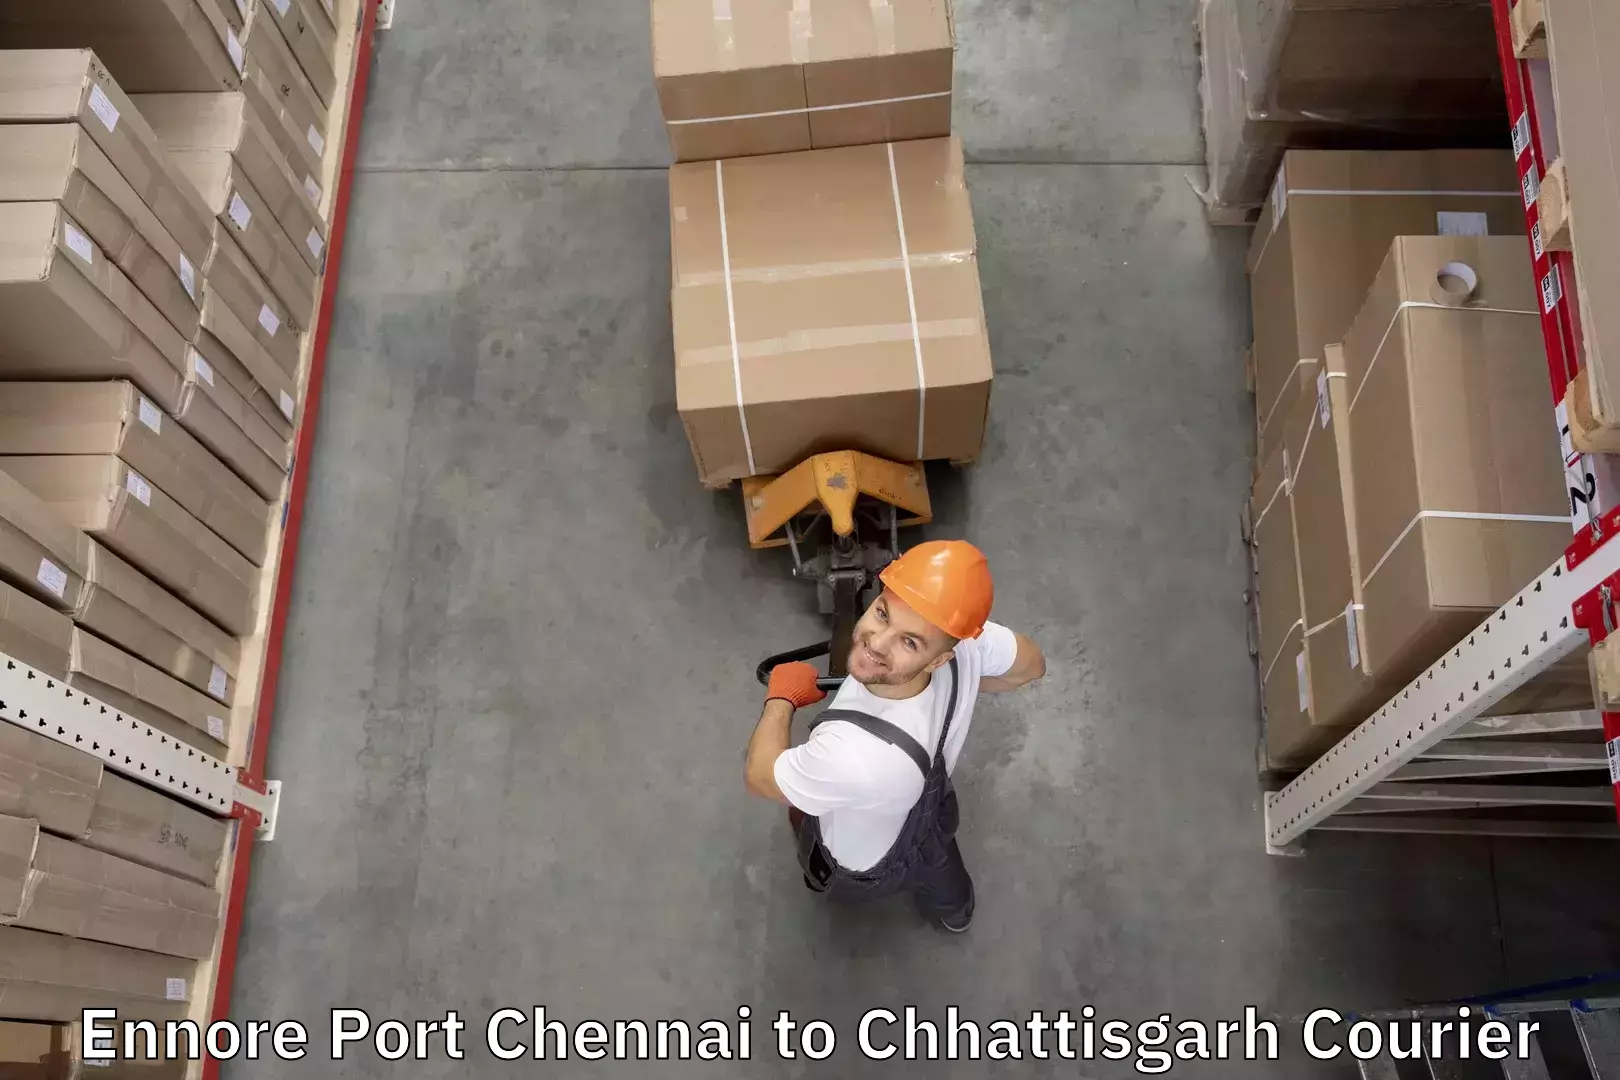 Baggage transport cost in Ennore Port Chennai to Nagri